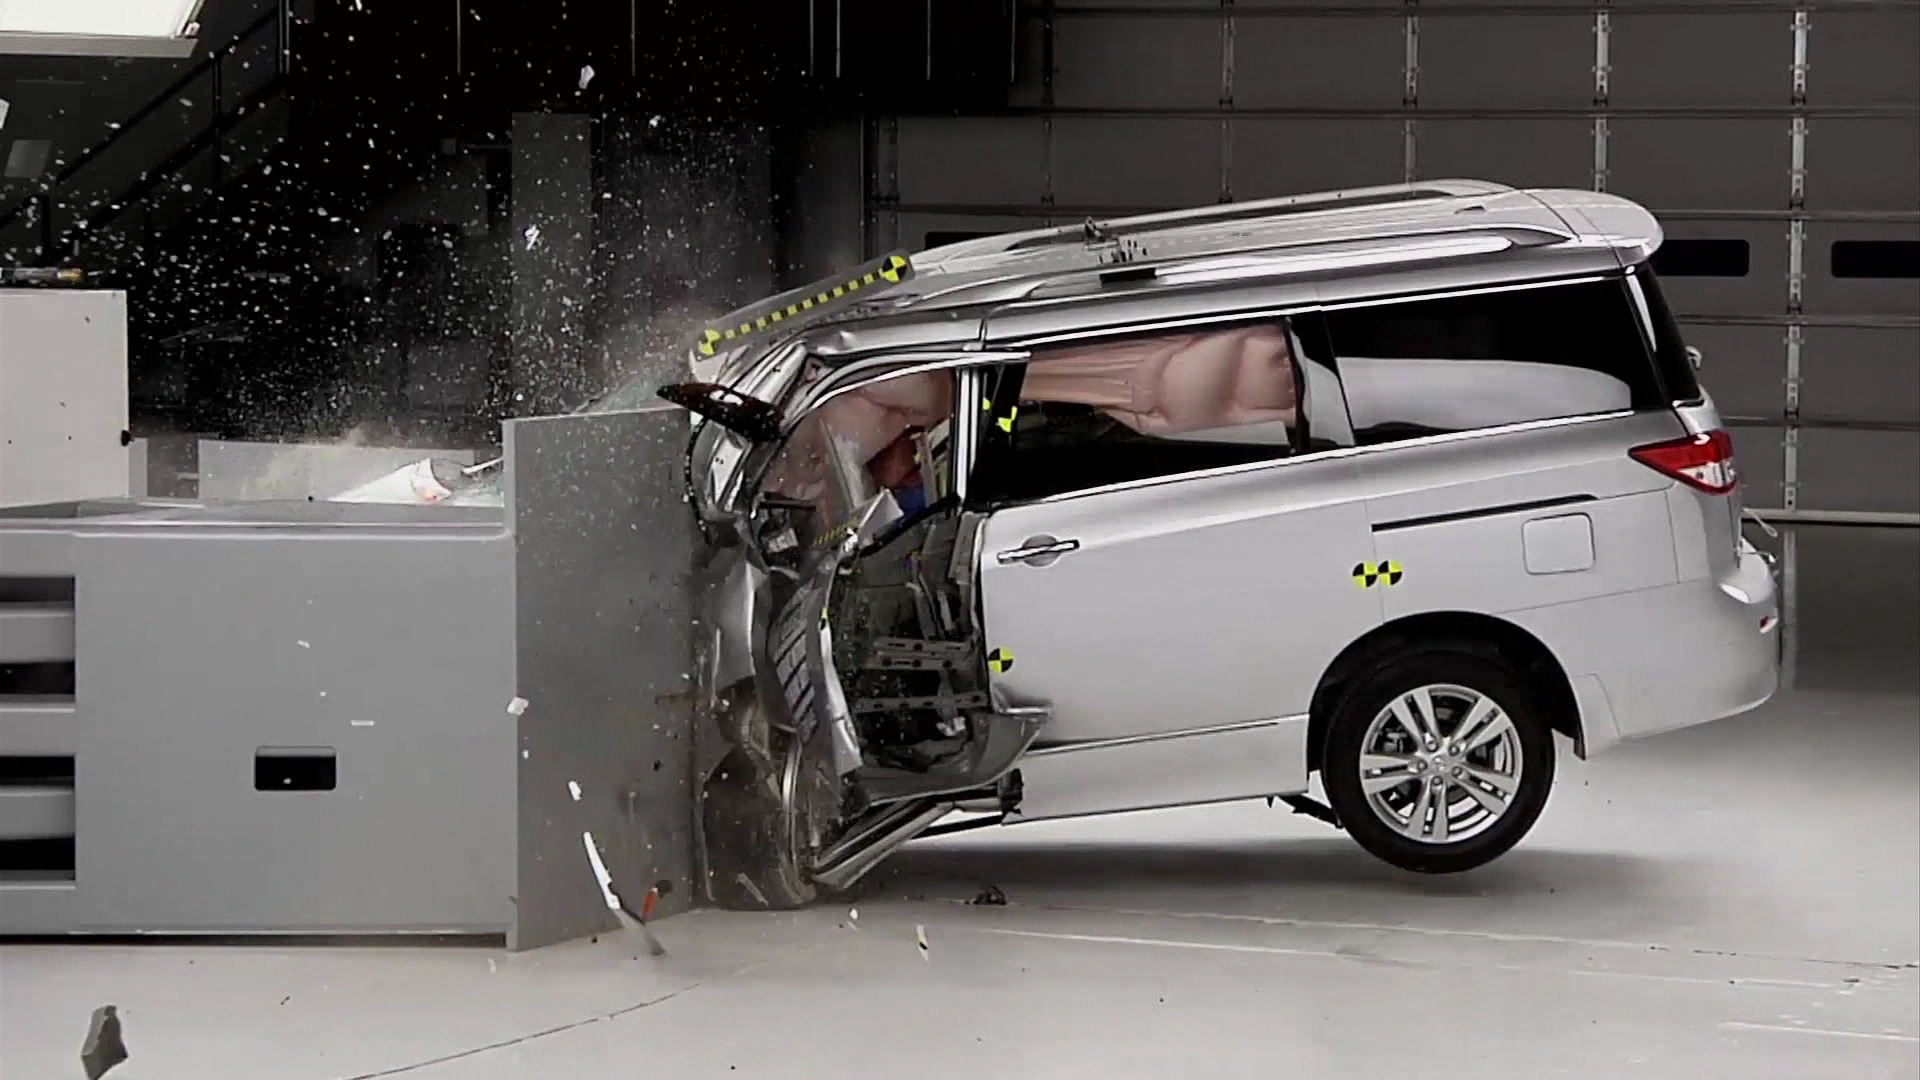 IIHS crash test safety ratings draw poor reviews for Chrysler and Nissan - CBS News